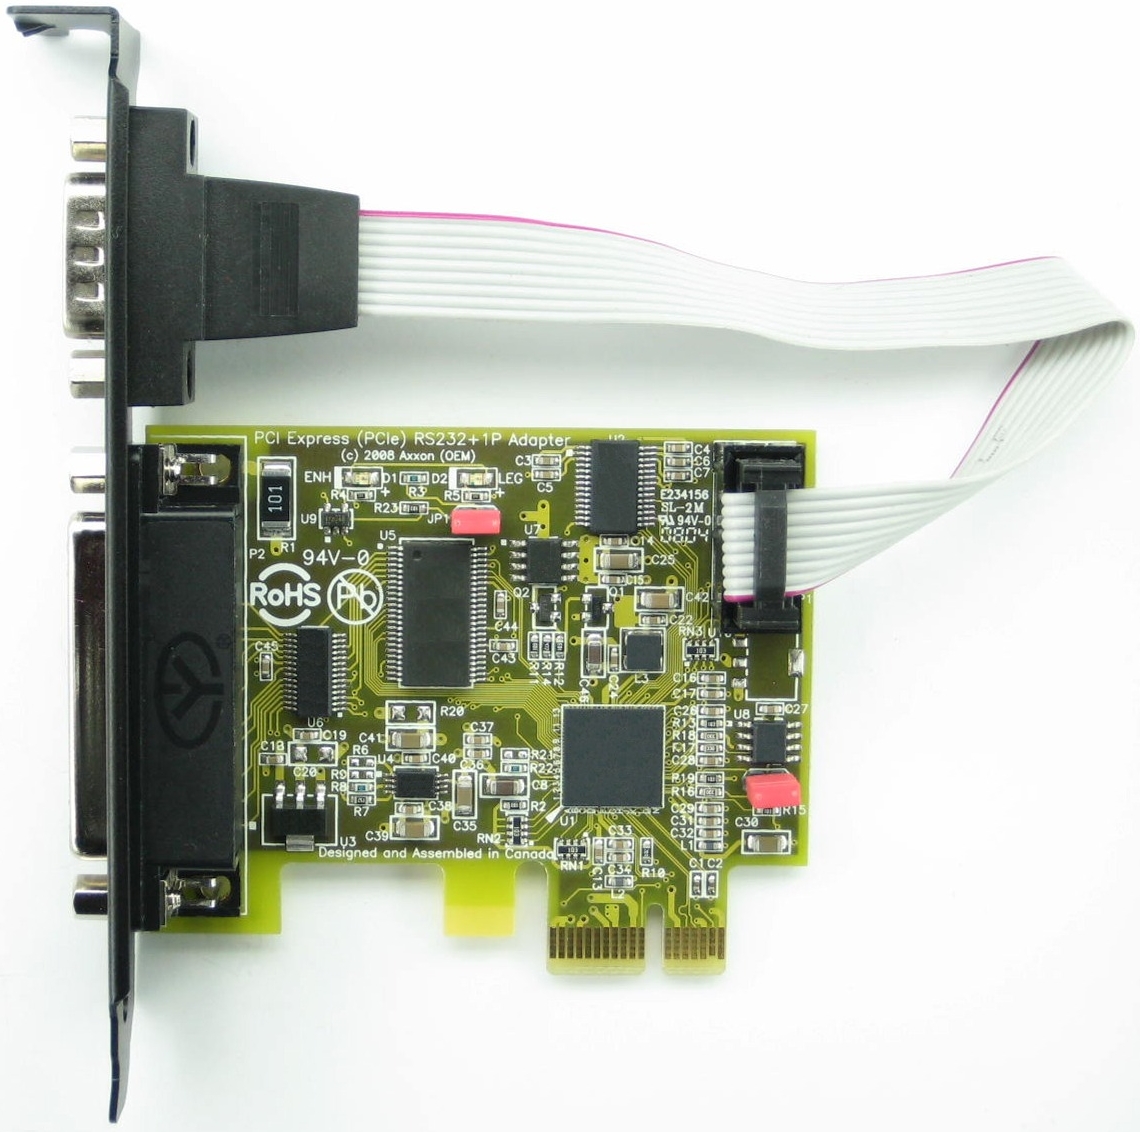 Click for large picture of the PCI Express (PCIe) LF769KB adapter